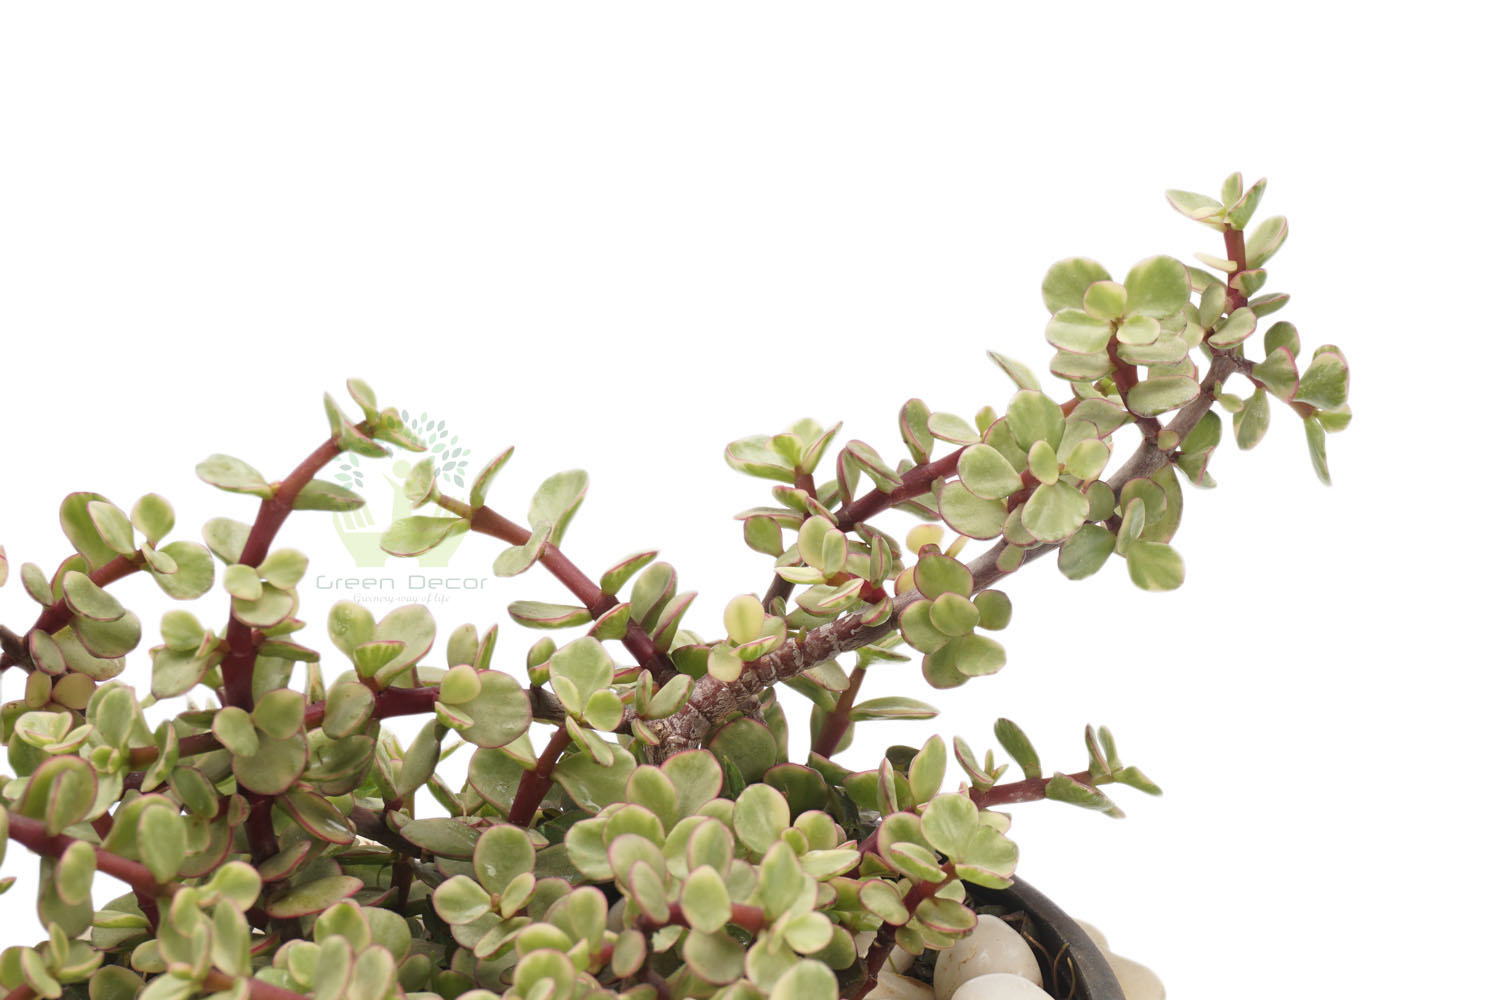 Buy Elephant Bush Jade Plants , White Pots and seeds in Delhi NCR by the best online nursery shop Greendecor.